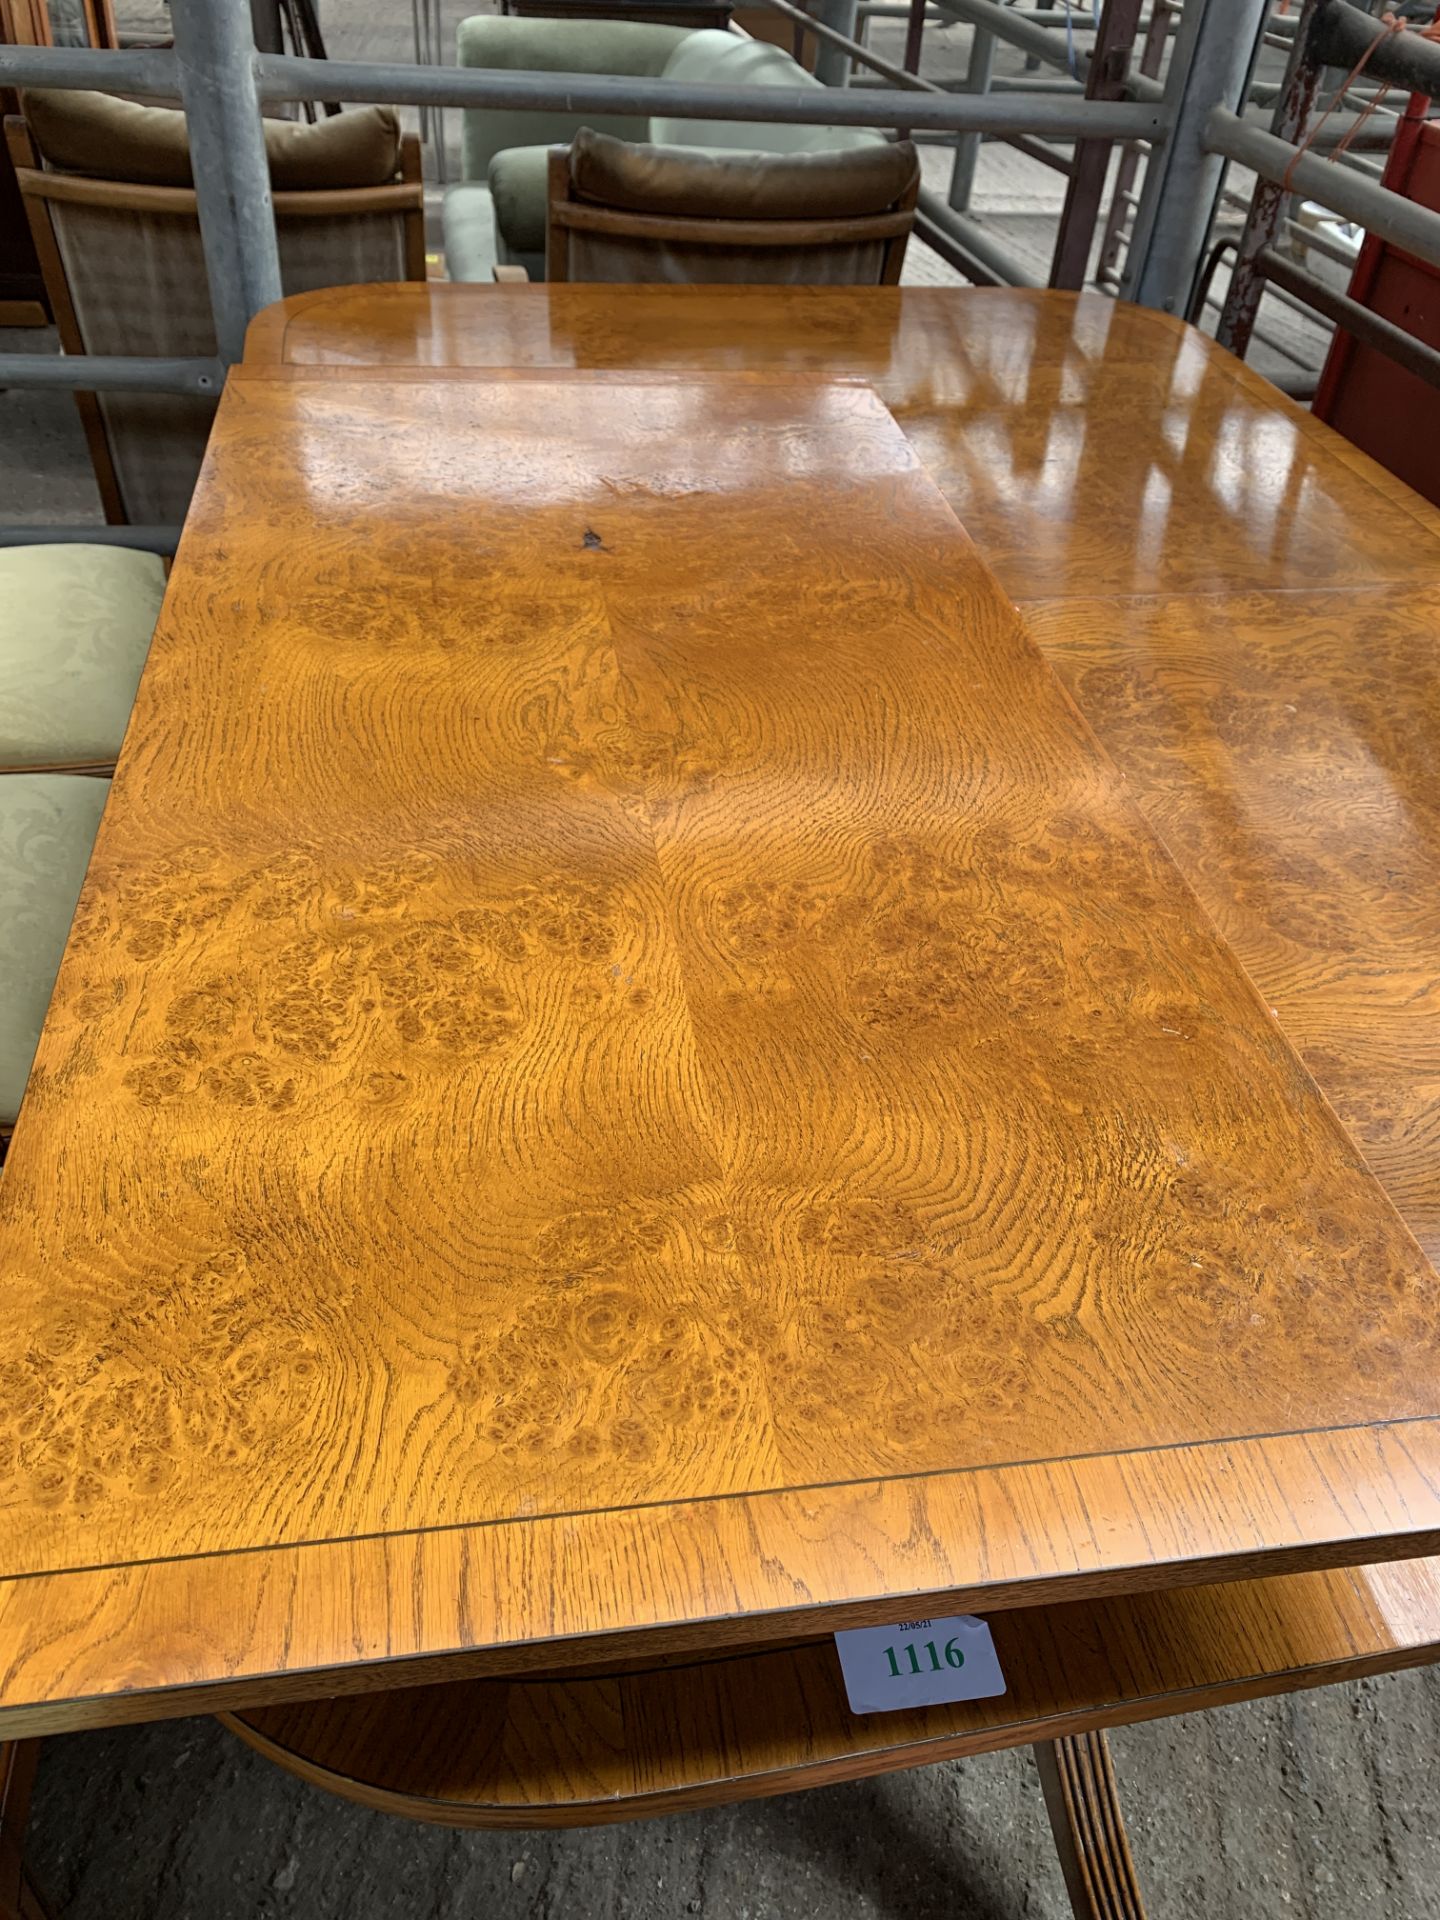 Walnut veneer extendable dining table by Brights of Nettlebed - Image 4 of 4